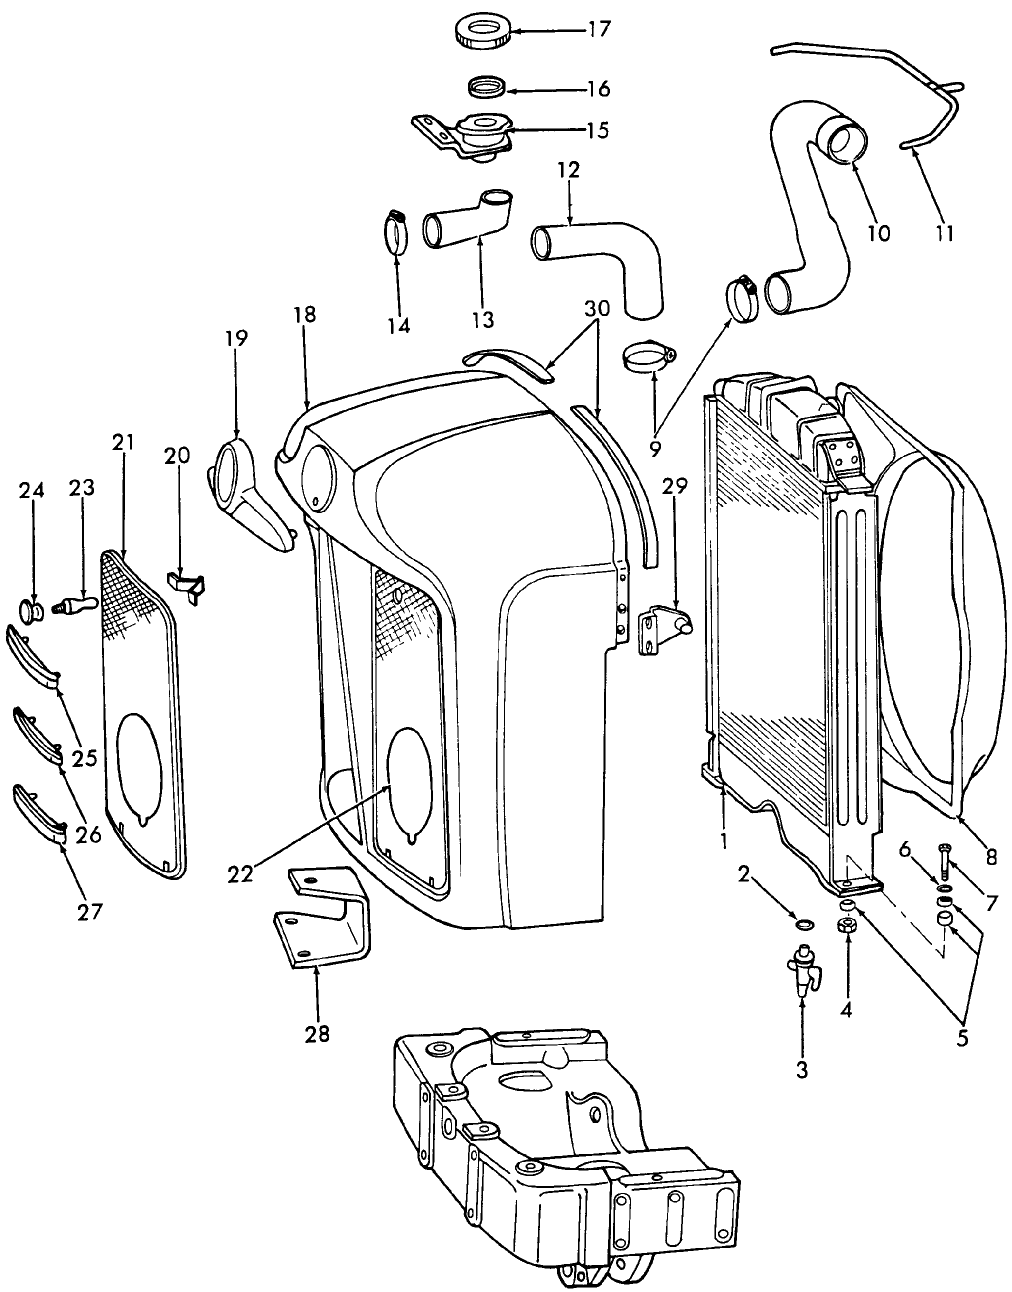 08A01 COOLING SYSTEM